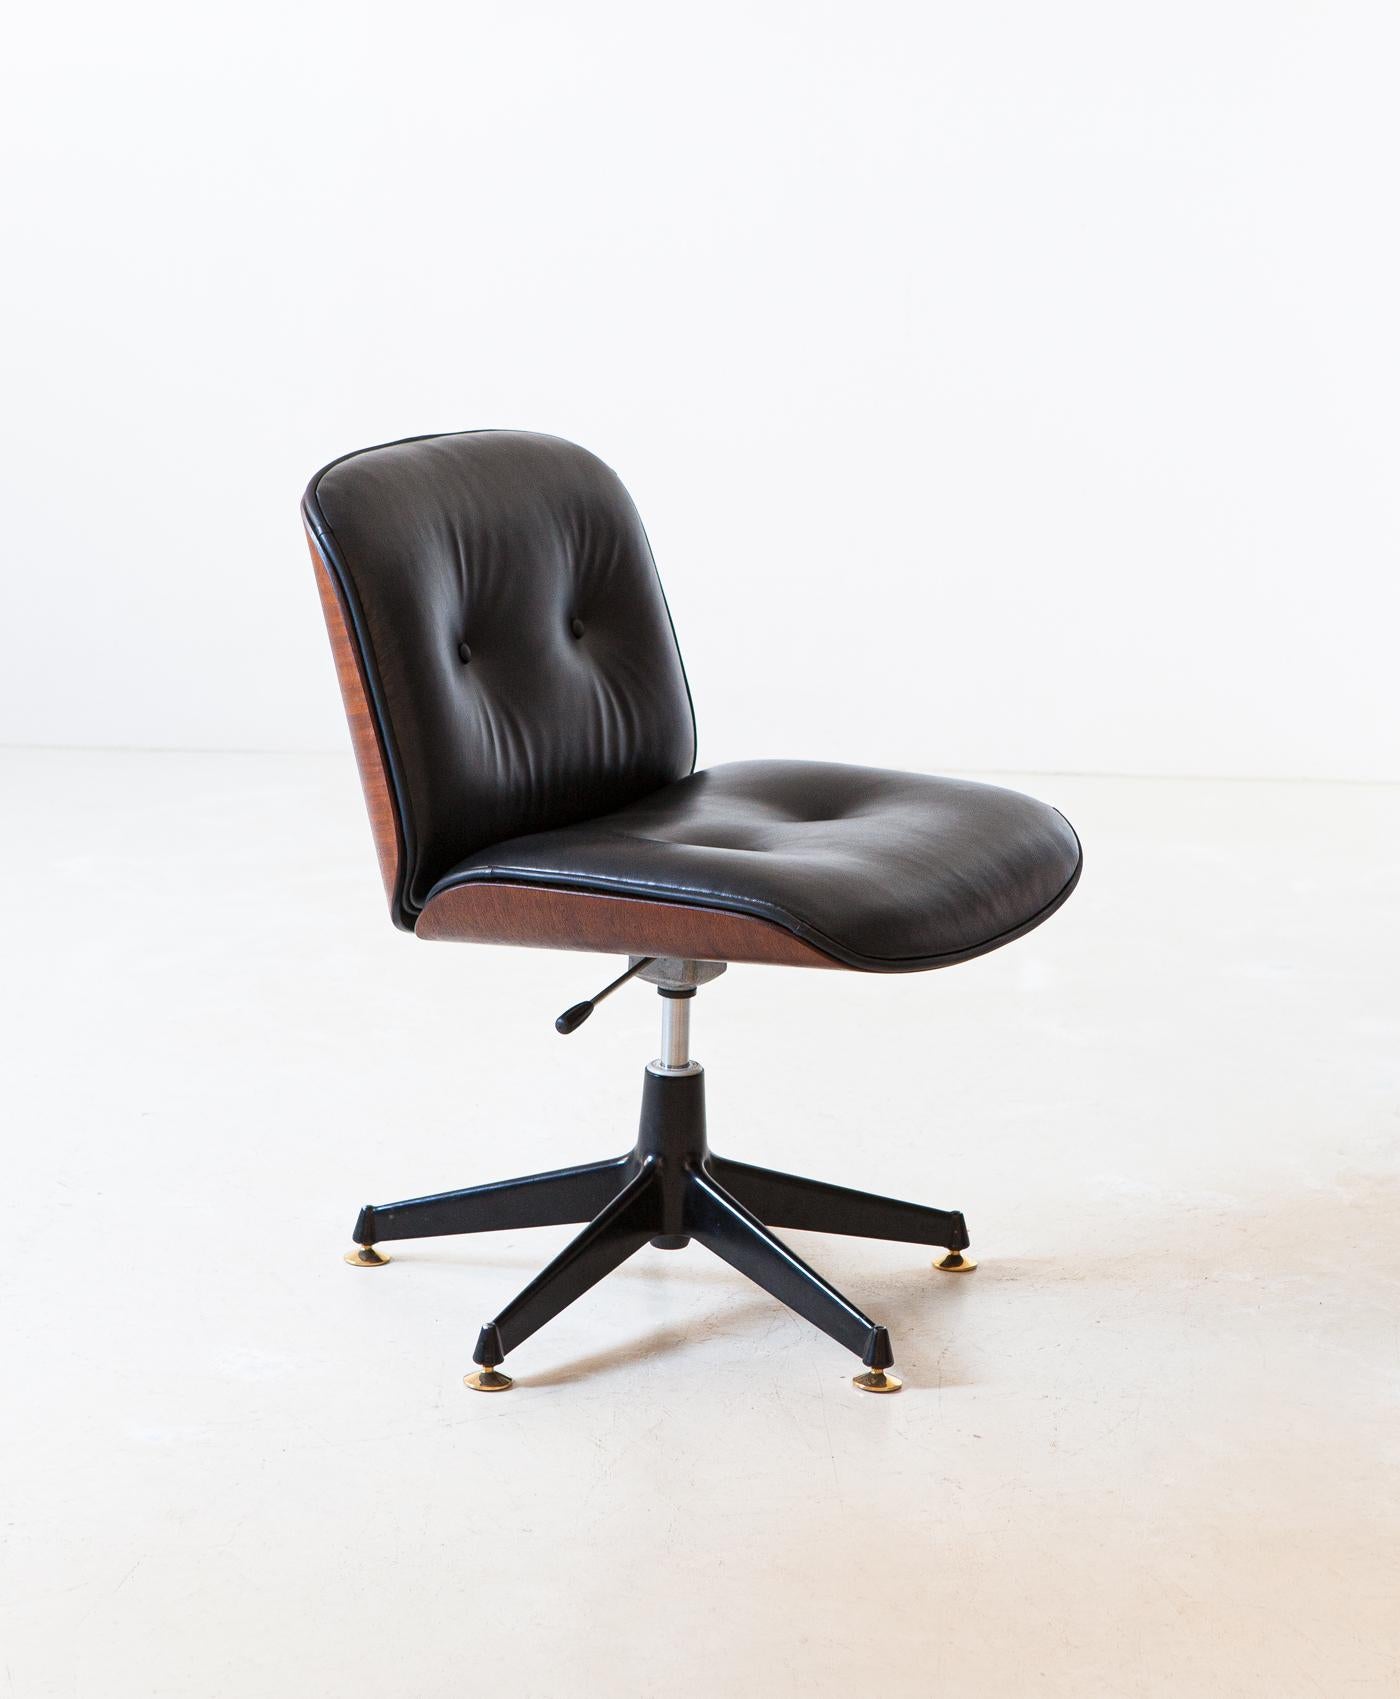 Swivel chair designed by Ico Parisi and produced by M.I.M. Roma (Mobili Italiani Moderni), Italy, 1960s

Curved wooden shells walnut veneered, black metal legs with brass feets and genuine black leather.

The wooden parts are re-polished.
New